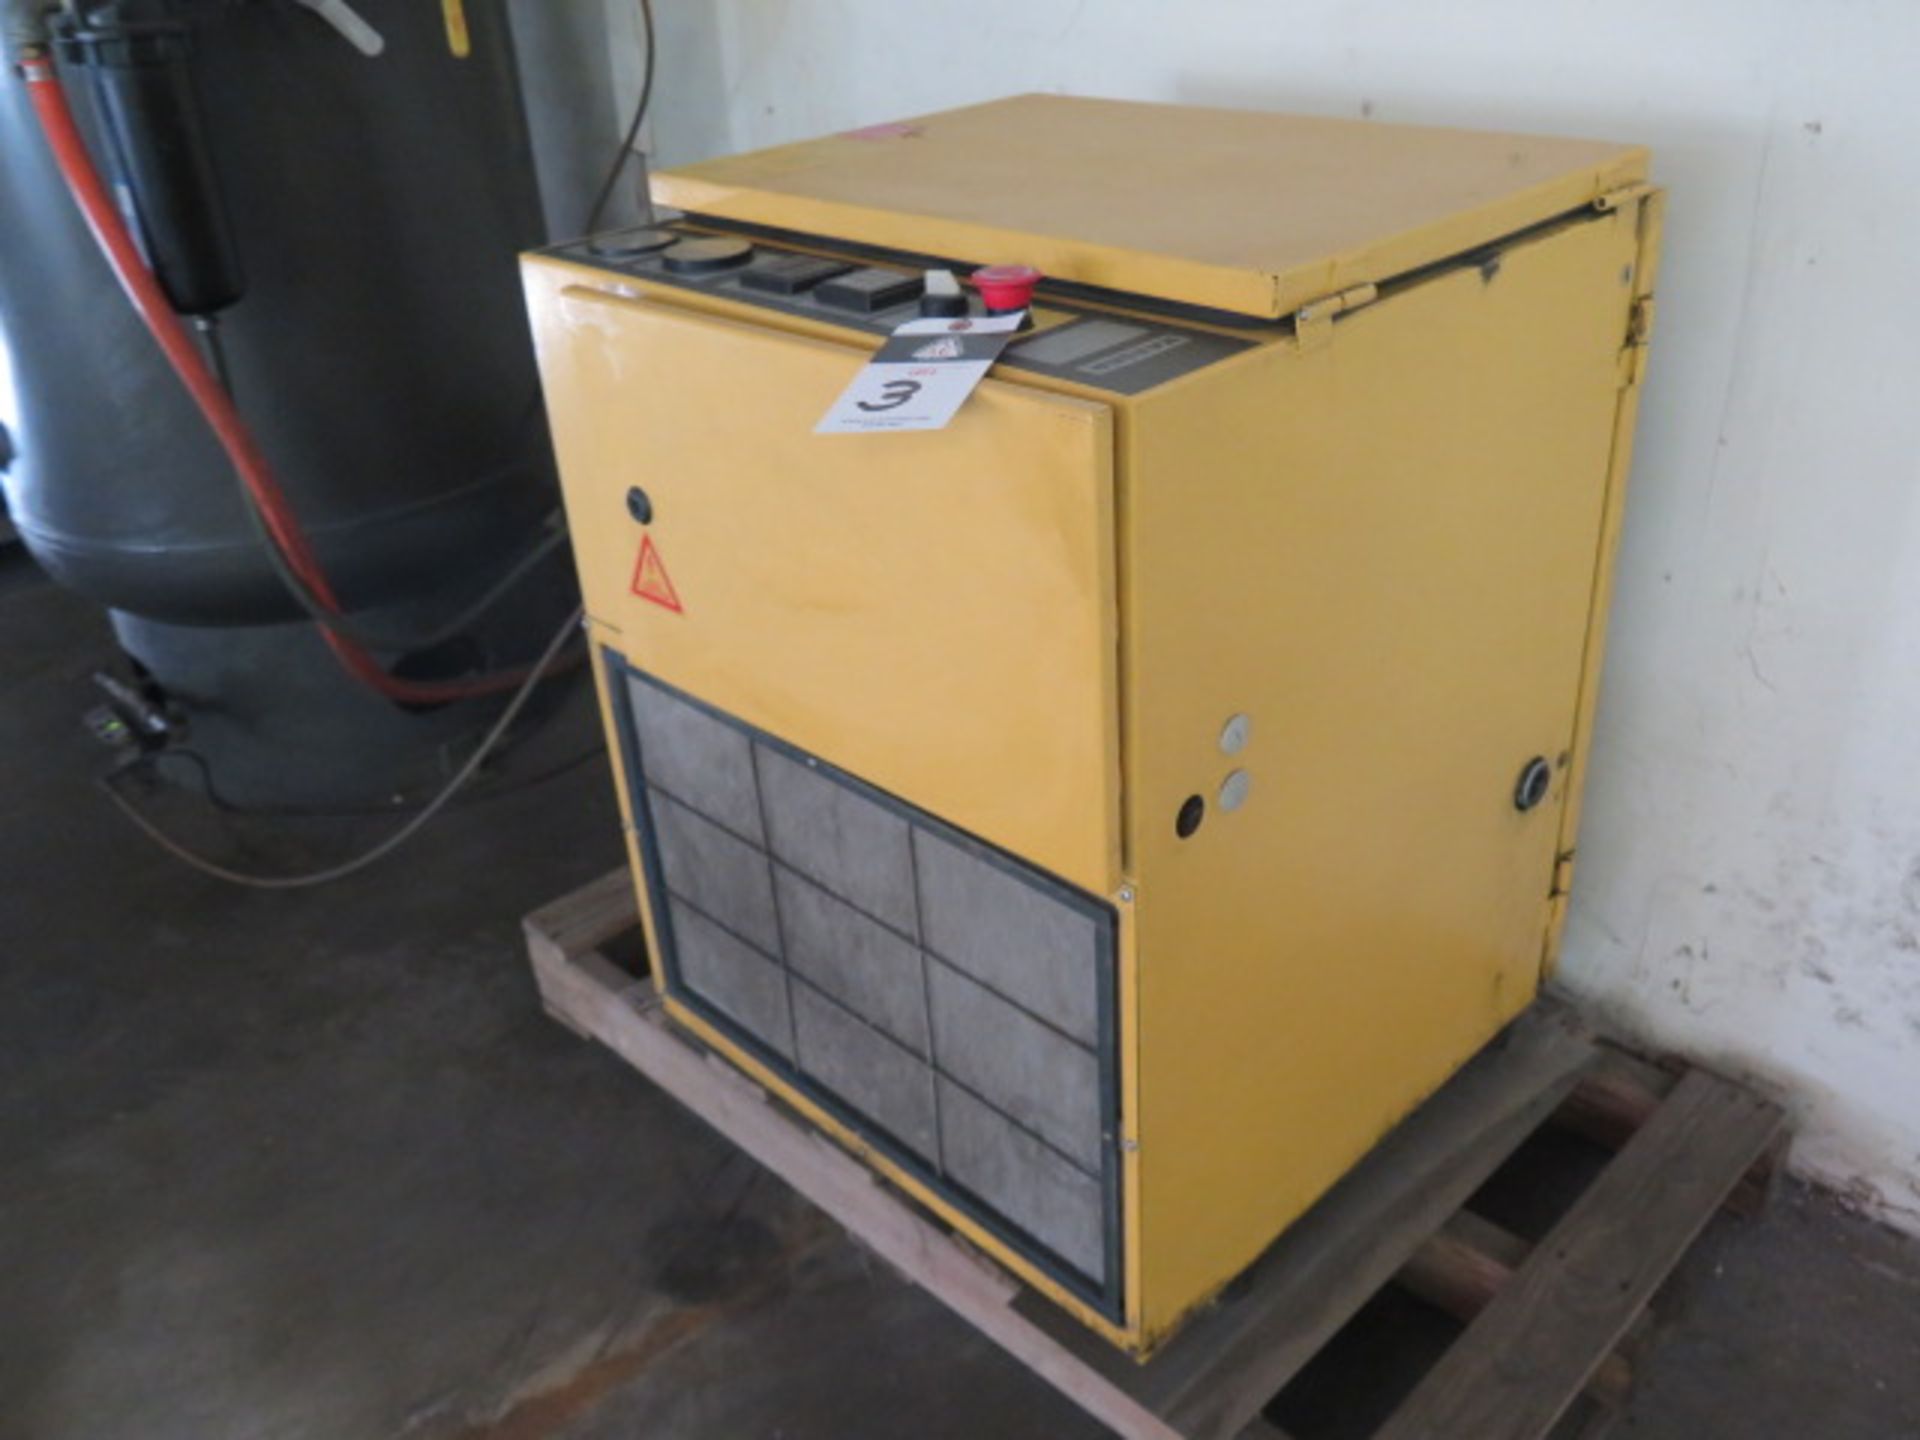 1996 Kaeser SM11 10Hp Rotary Air Compressor s/n 01114727 w/ 42 CFM @ 110 PSIG SOLD AS-IS - Image 2 of 6